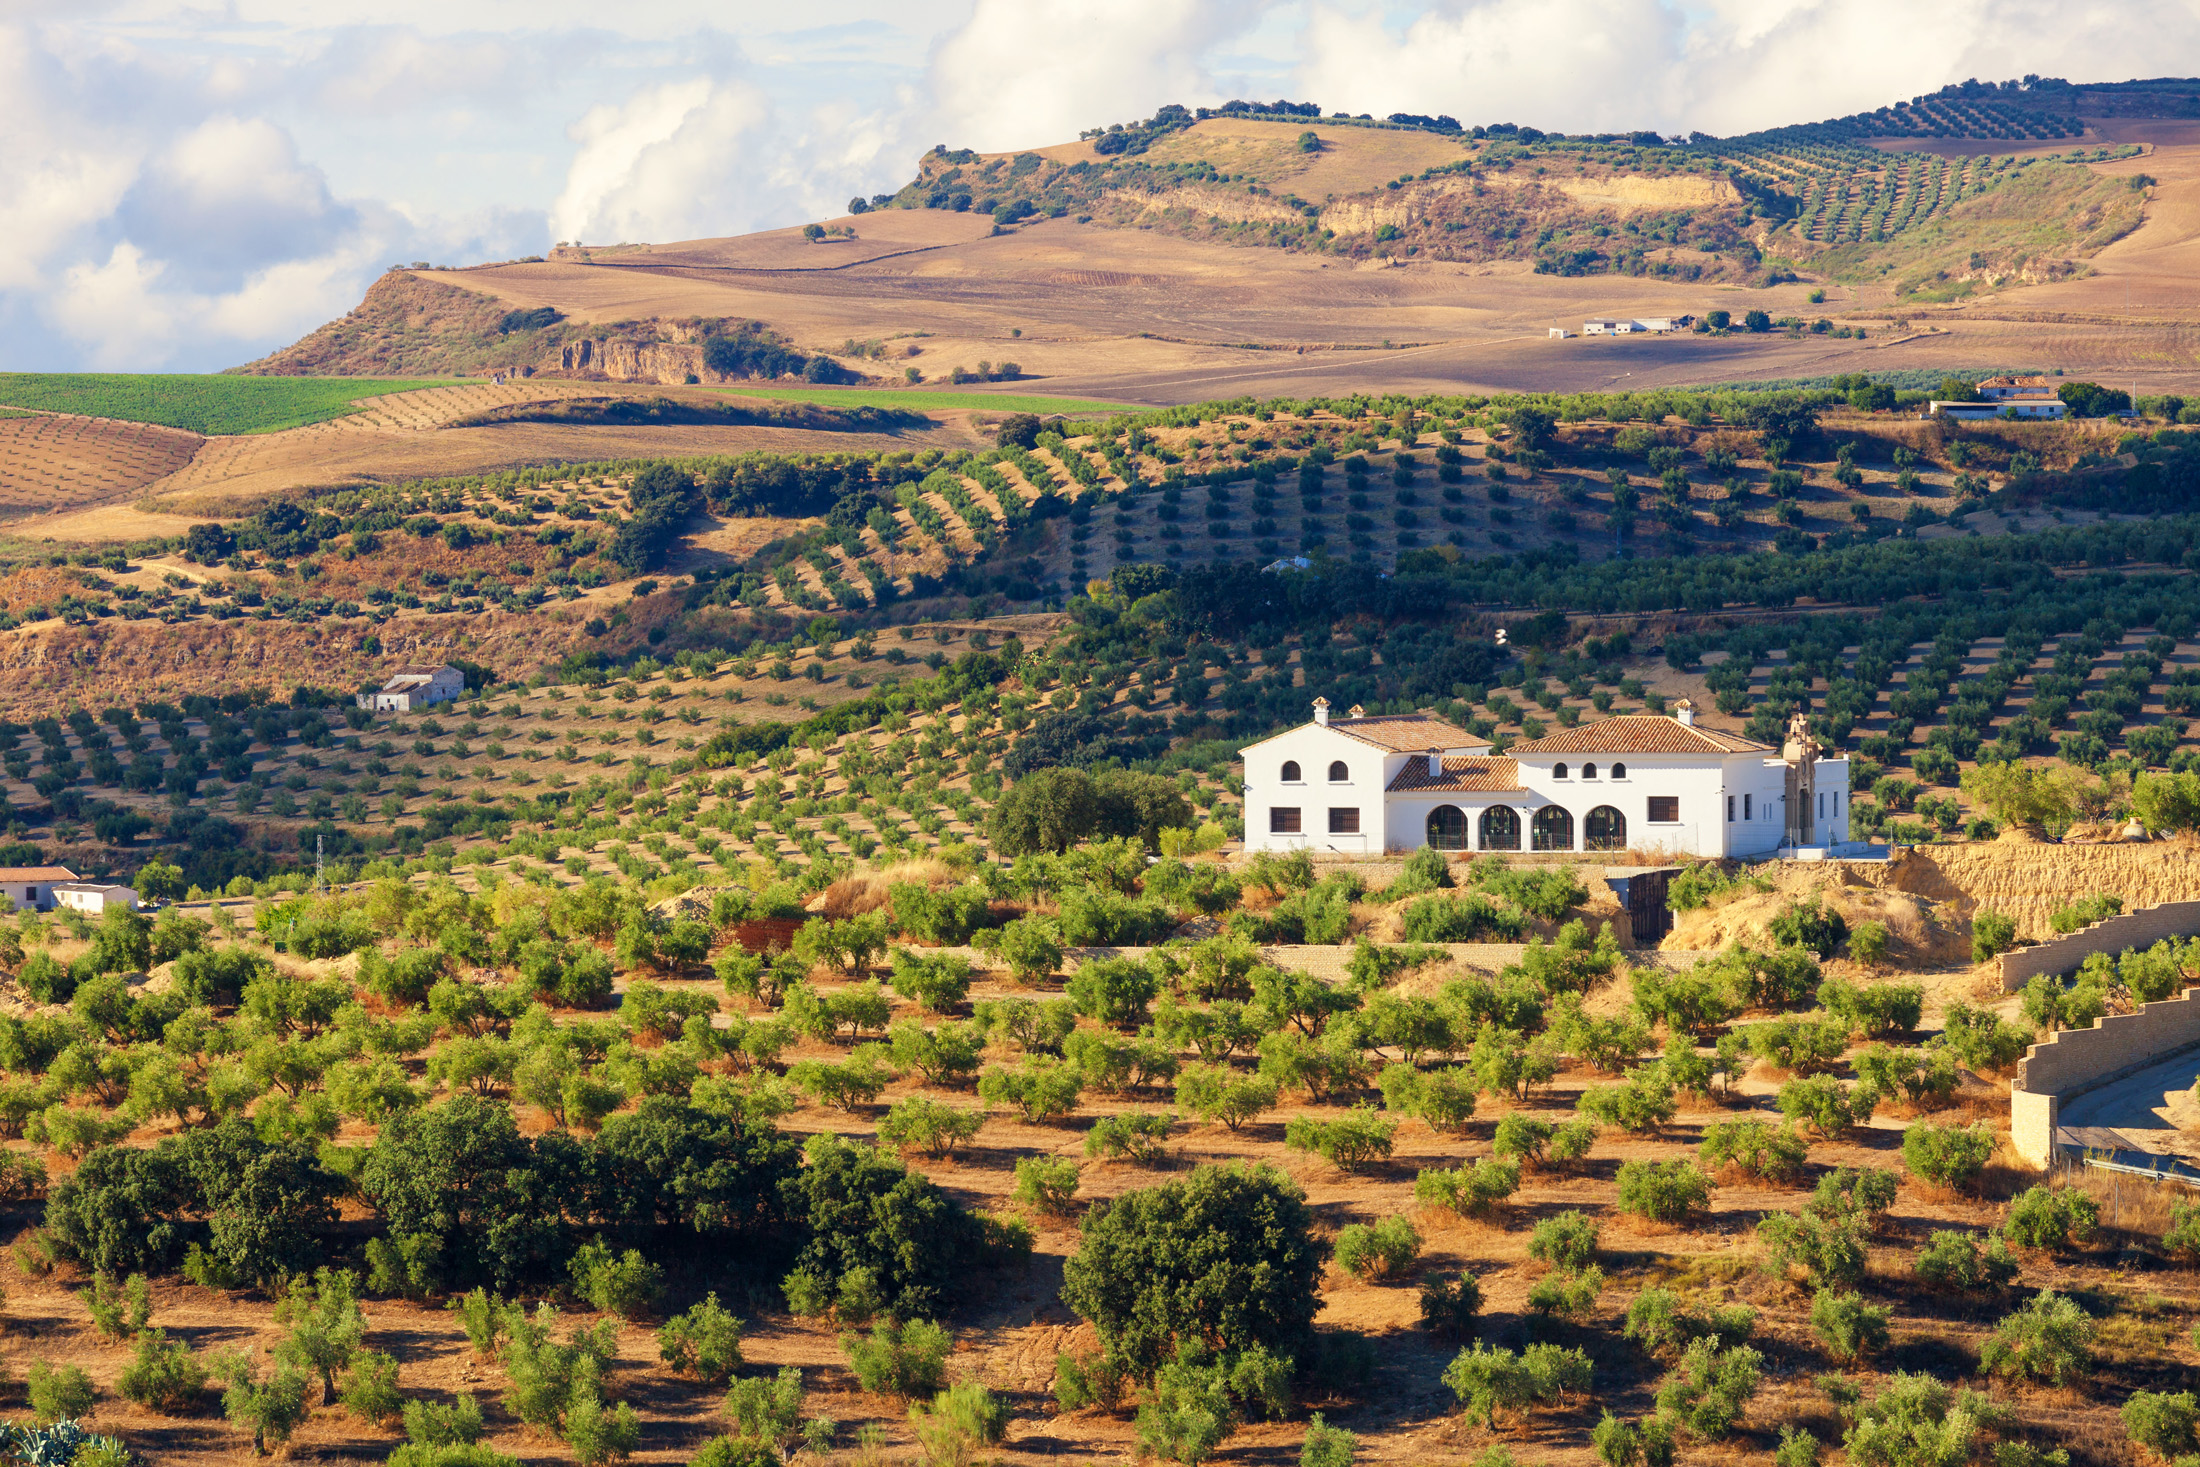 Andalusian cortijo (farmhouse) surrounded by olive groves